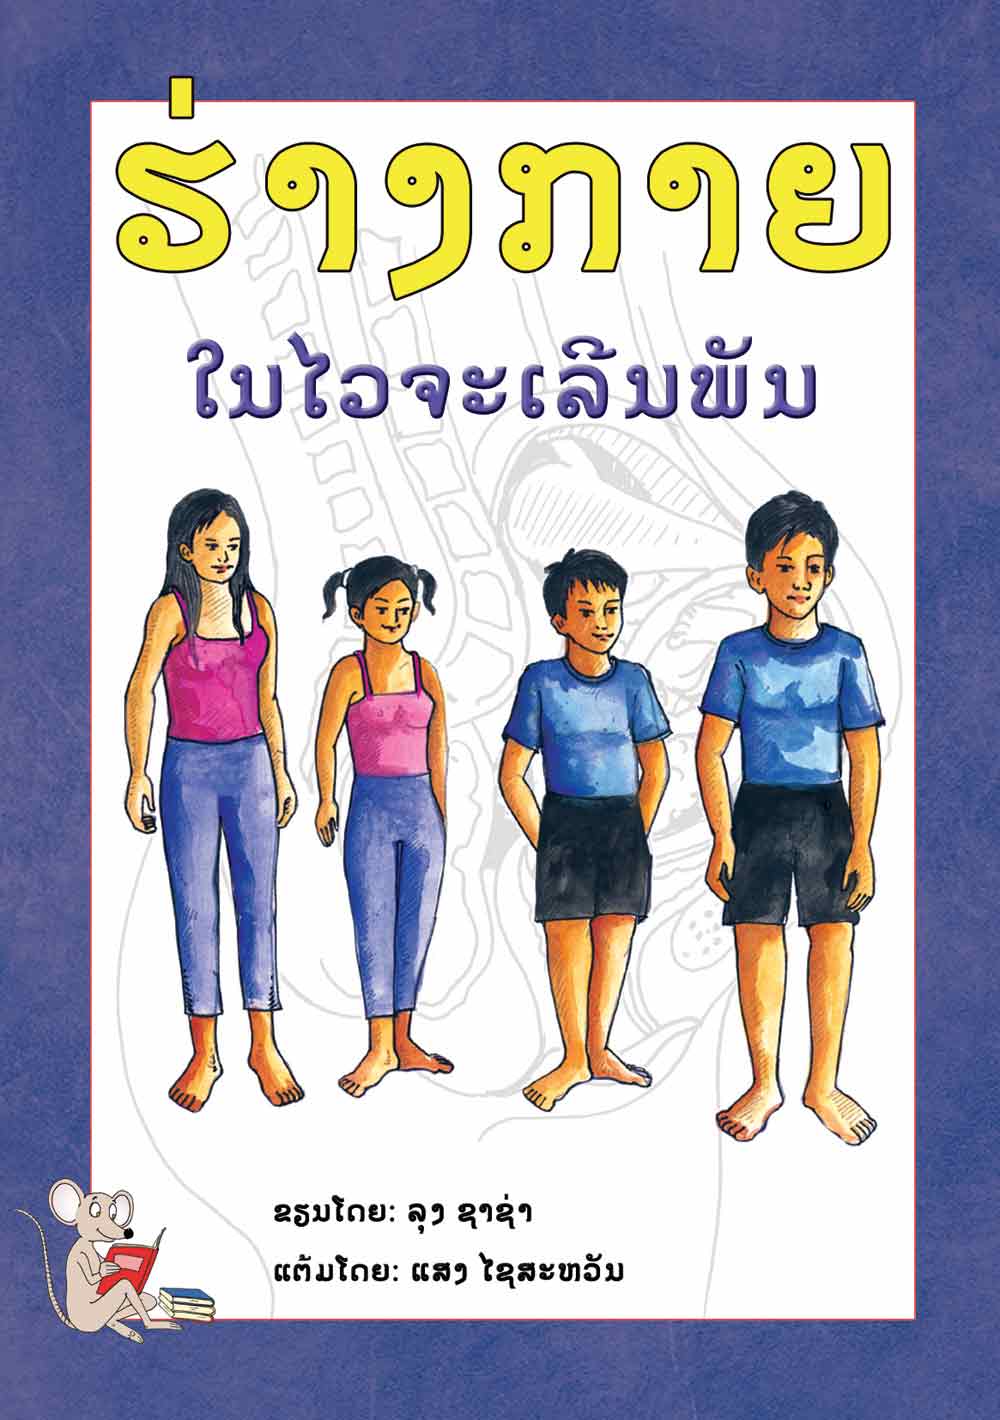 Our Bodies Are Changing large book cover, published in Lao language